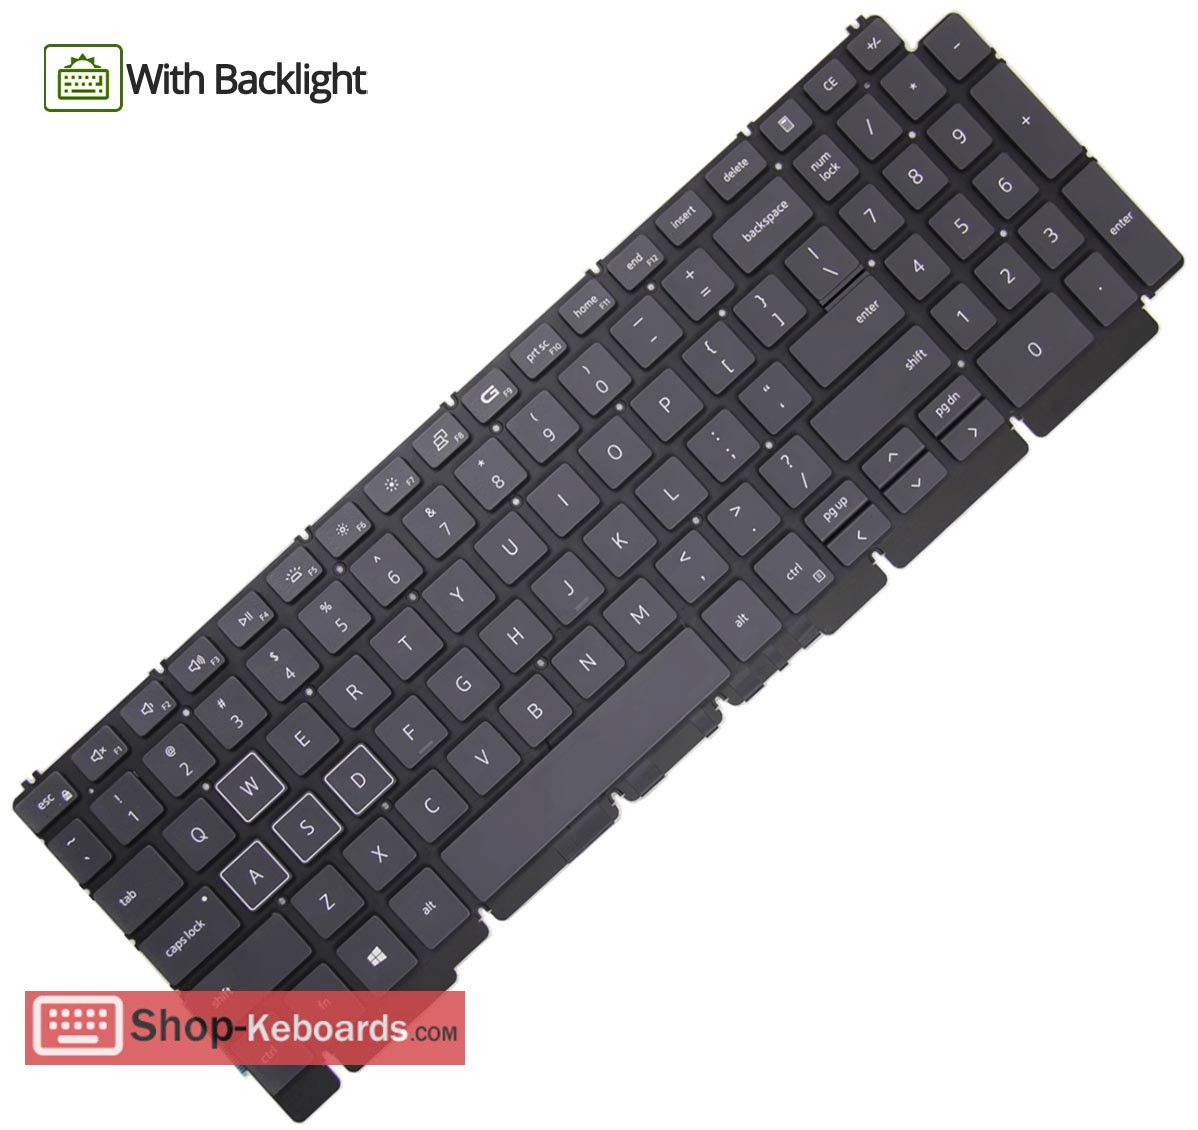 Dell G15 5515 RYZEN EDITION Keyboard replacement